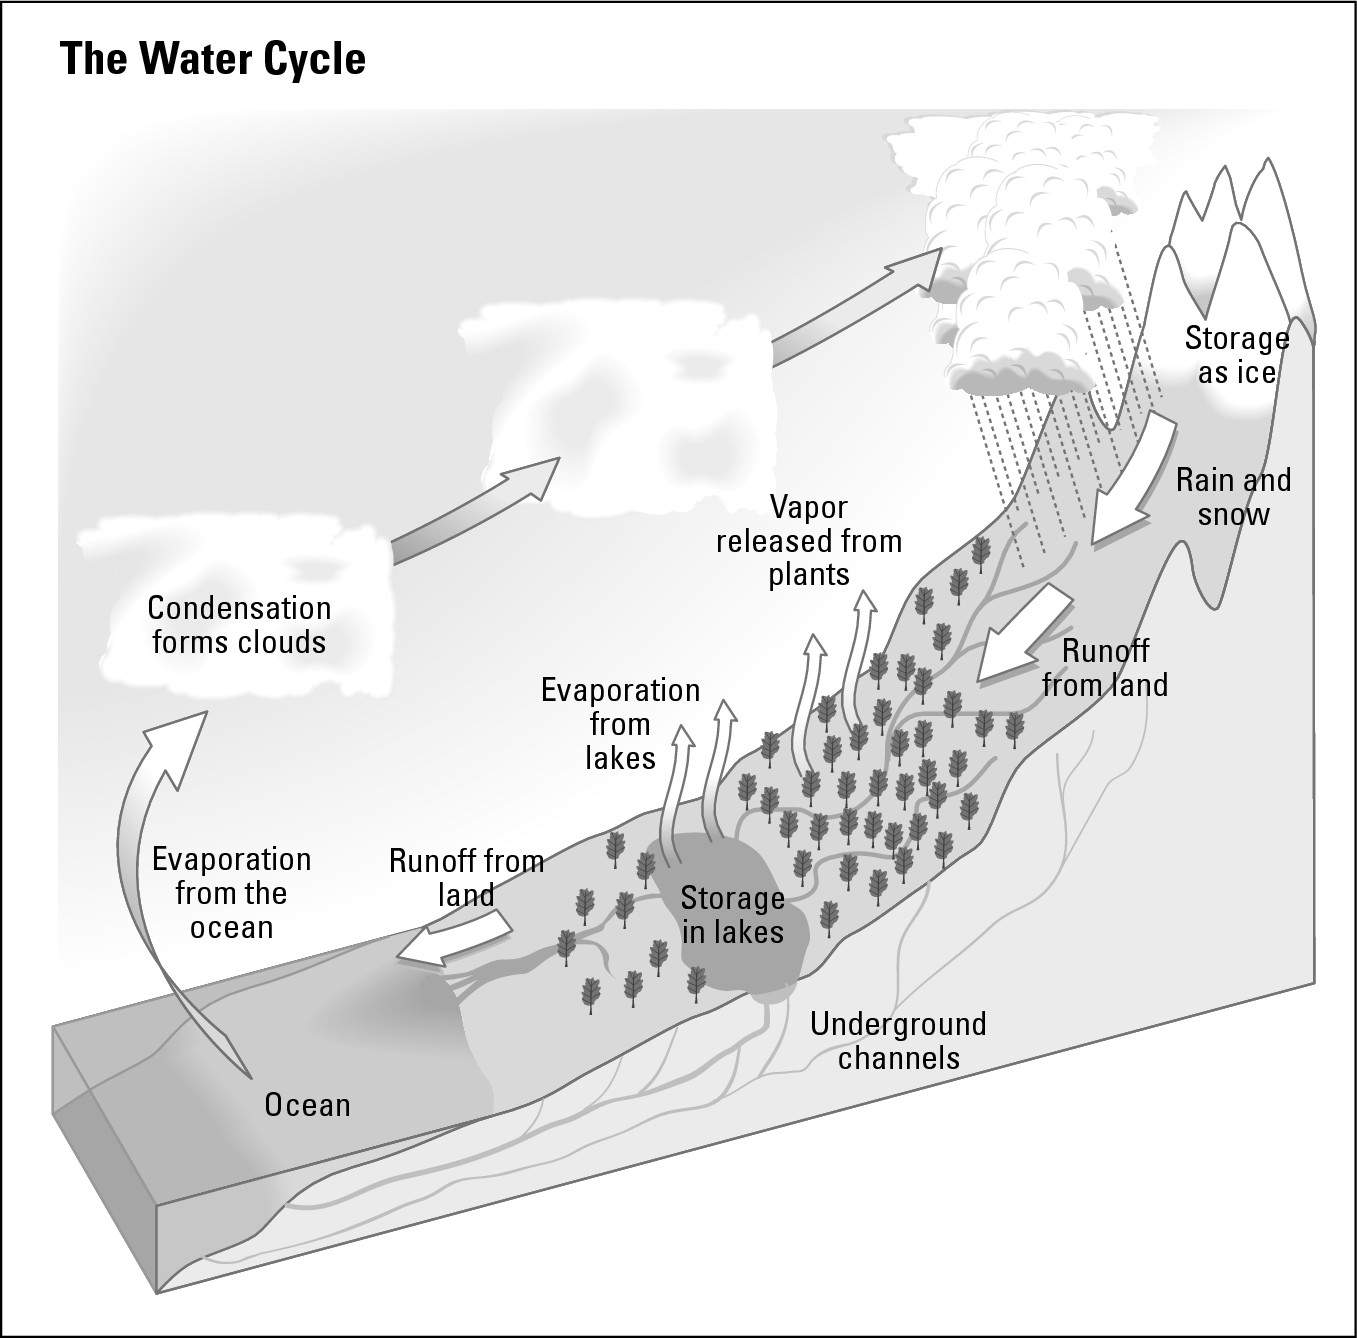 Figure 8-4: The water cycle.